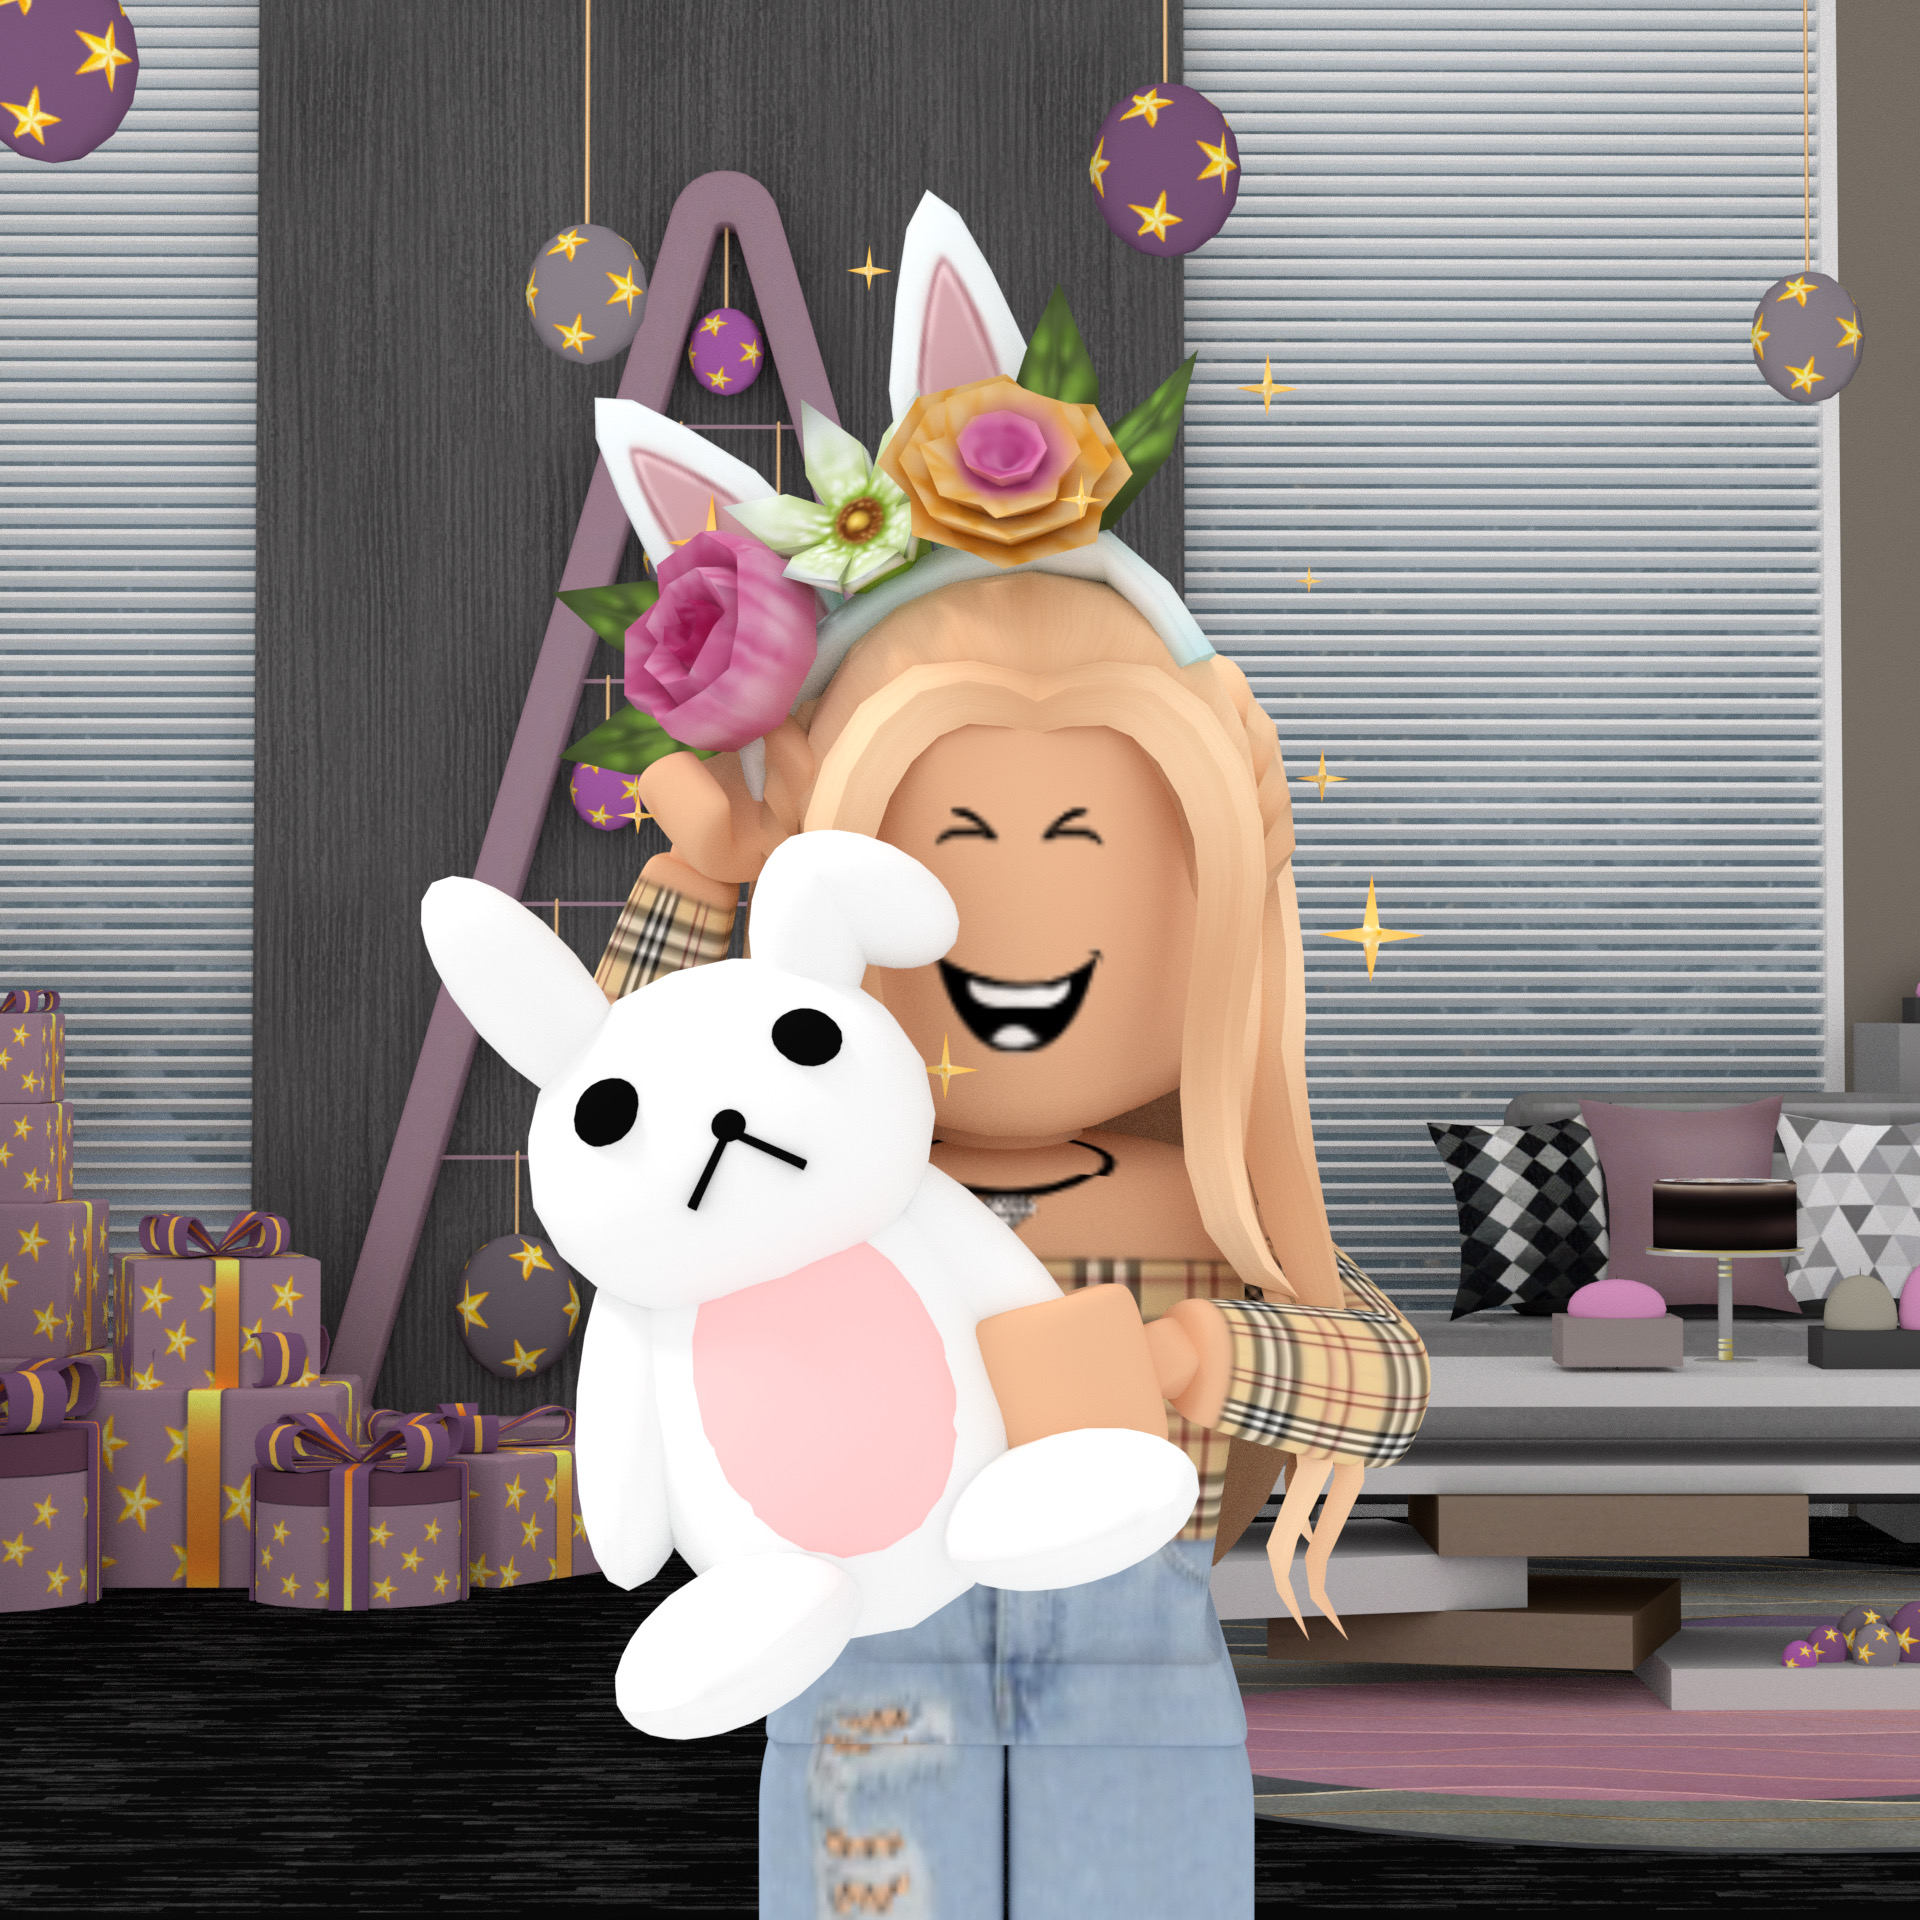 Easter Gfx Bunny Roblox Robloxgfx Image By Star - roblox easter bunny package